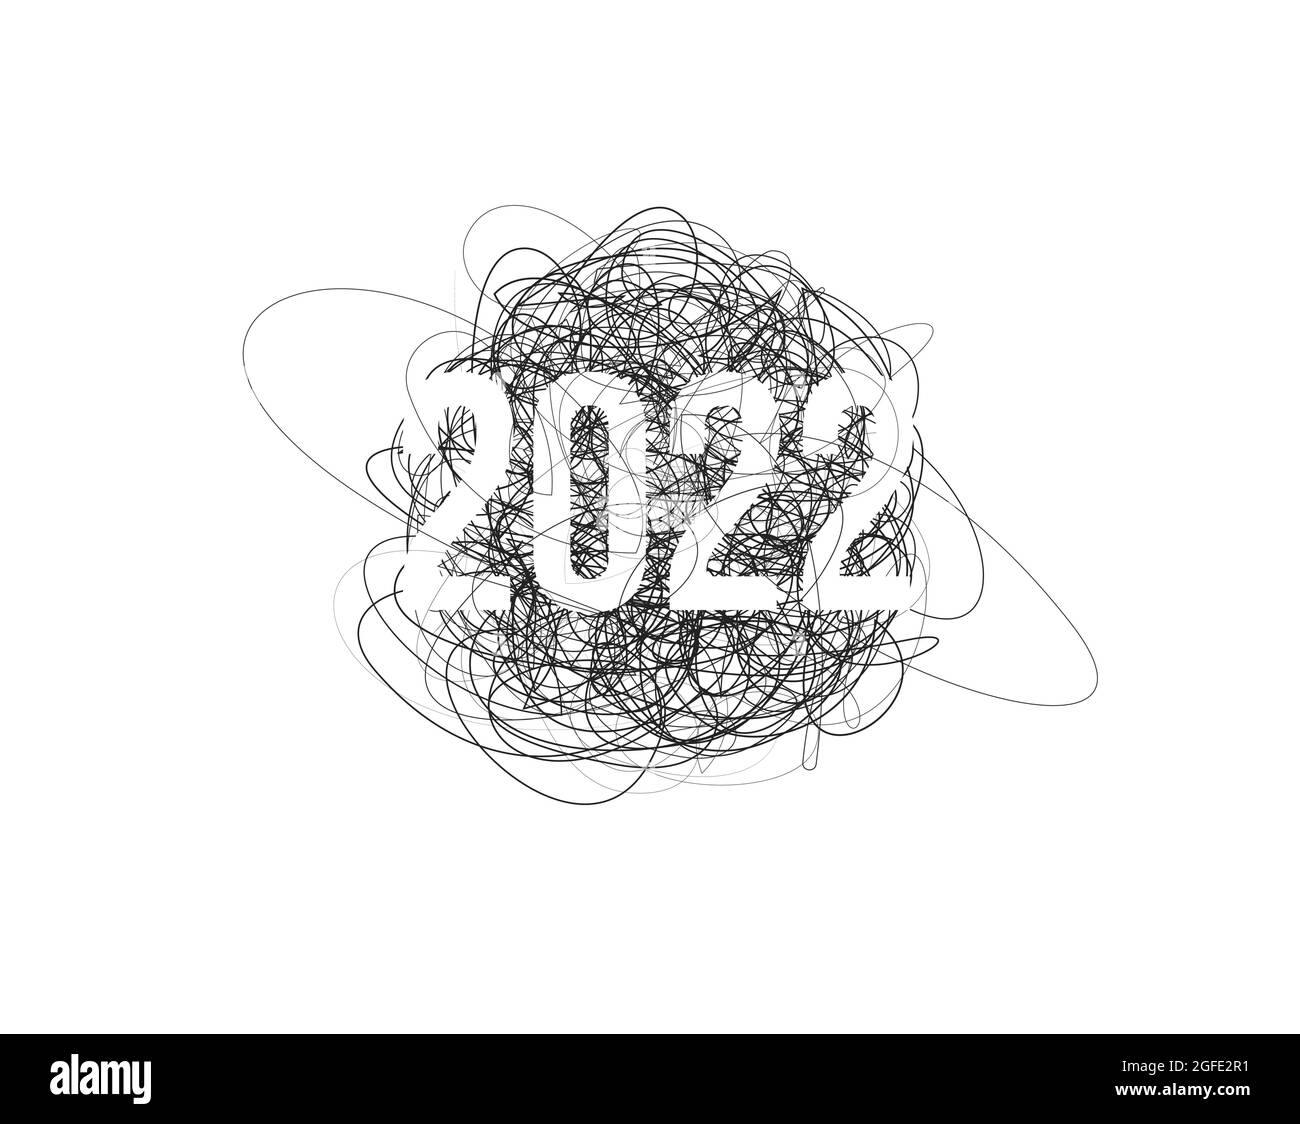 2022 new year, chaos pencil drawn thread, scrawl drawing lines clew background with 2022 numbers, creative vector illustration for christmass holiday Stock Vector